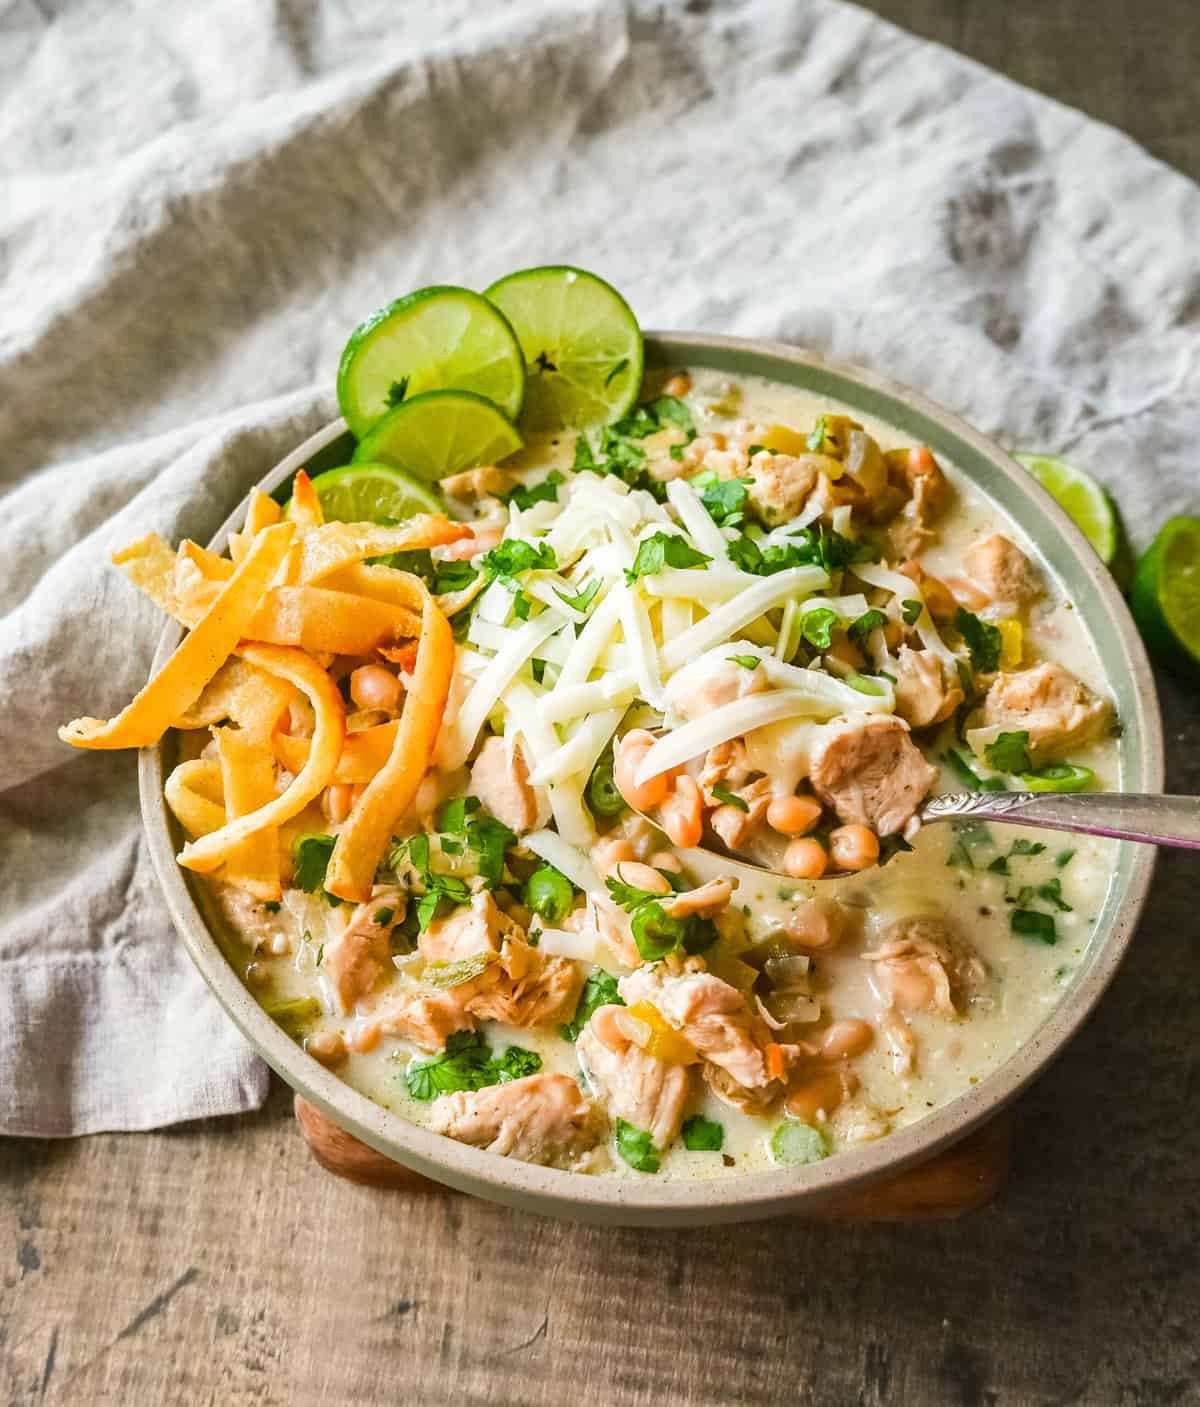 White Chicken Chili. This White Chicken Chili Recipe is so creamy, delicious, and full of flavor. This quick and easy white chicken chili is a family favorite meal!